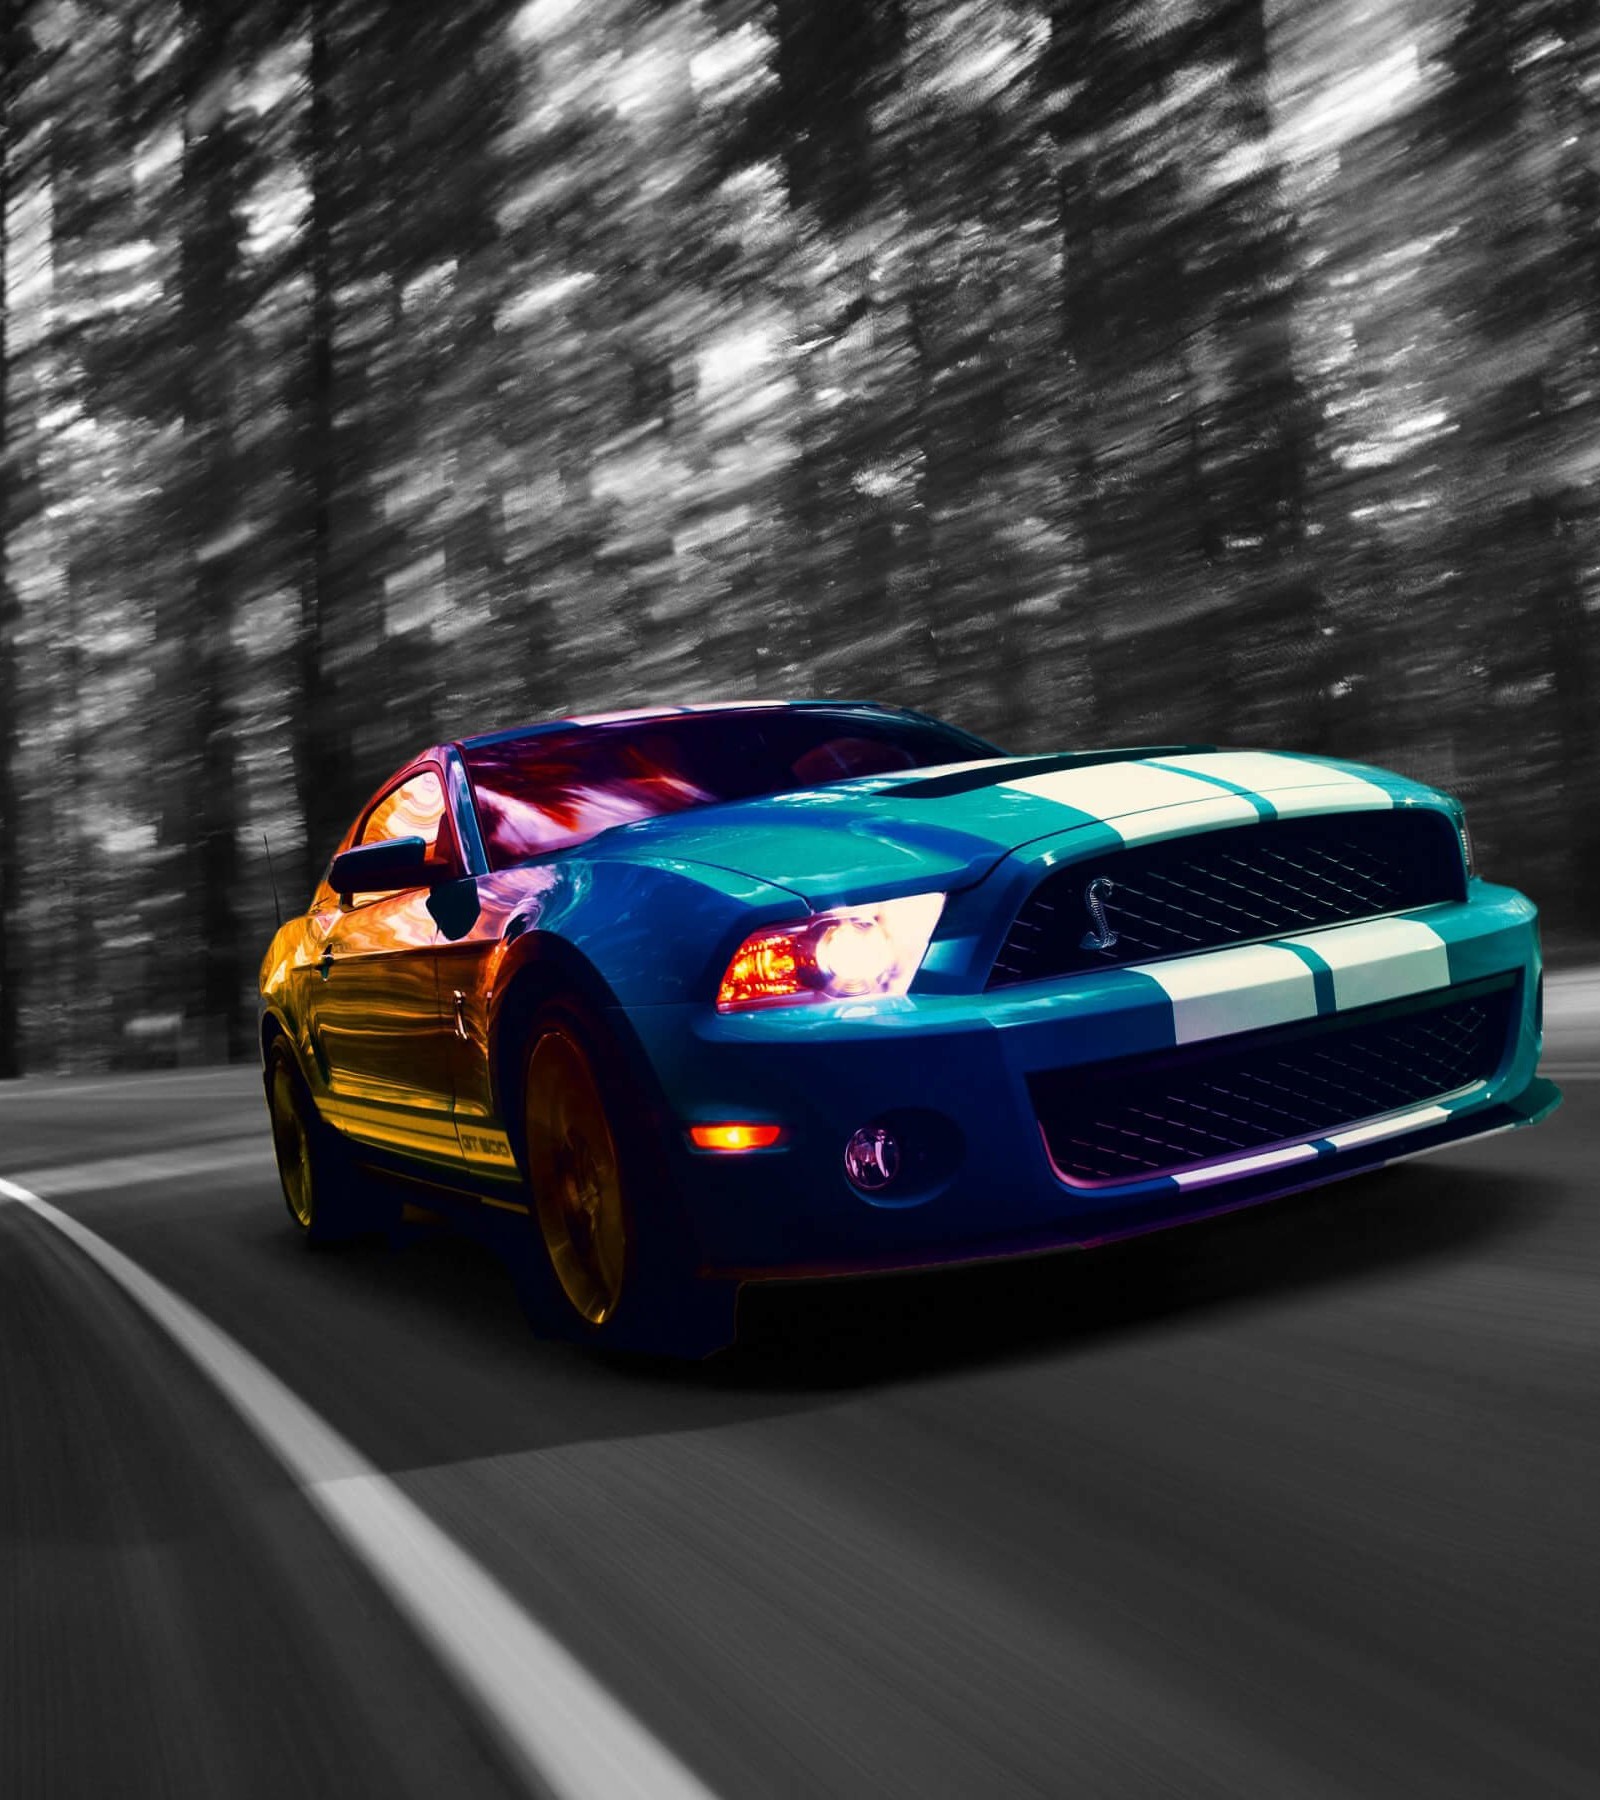 Ford Mustang Shelby GT500 Wallpaper for Amazon Kindle Fire HDX 8.9